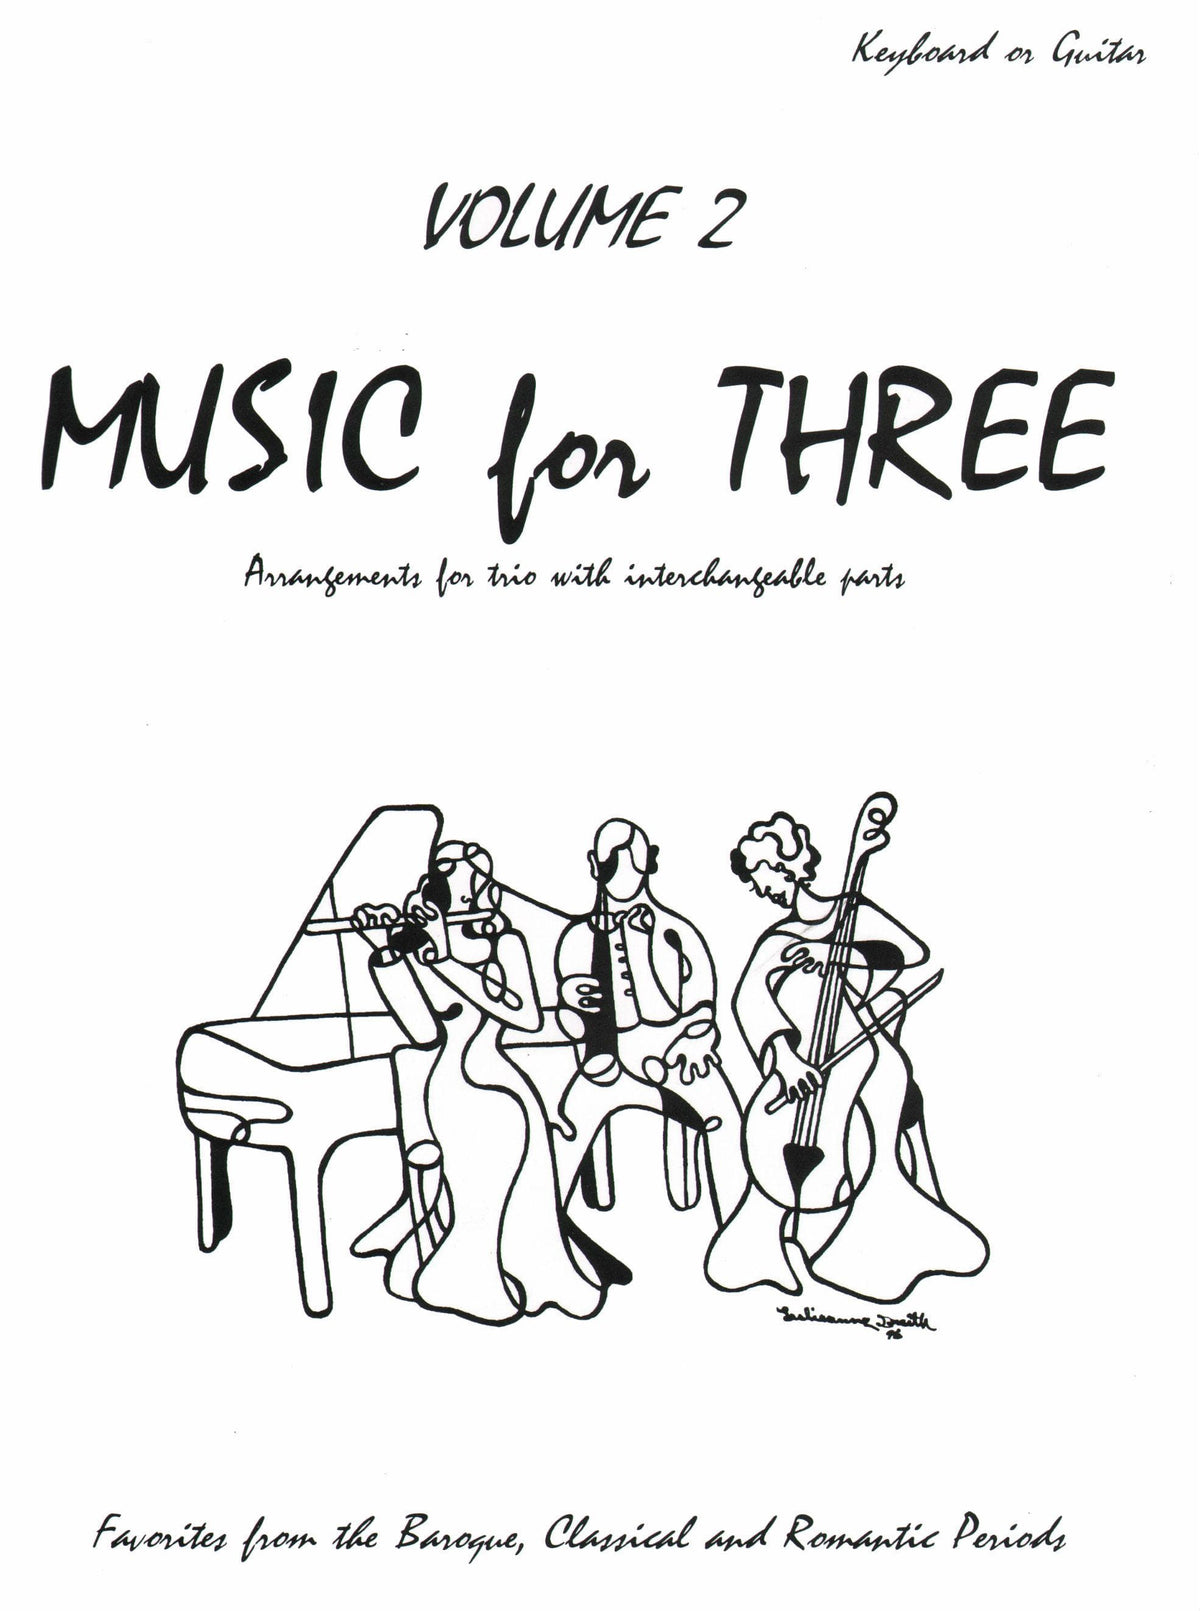 Music For Three Volume 2 Keyboard or Guitar Published by Last Resort Music